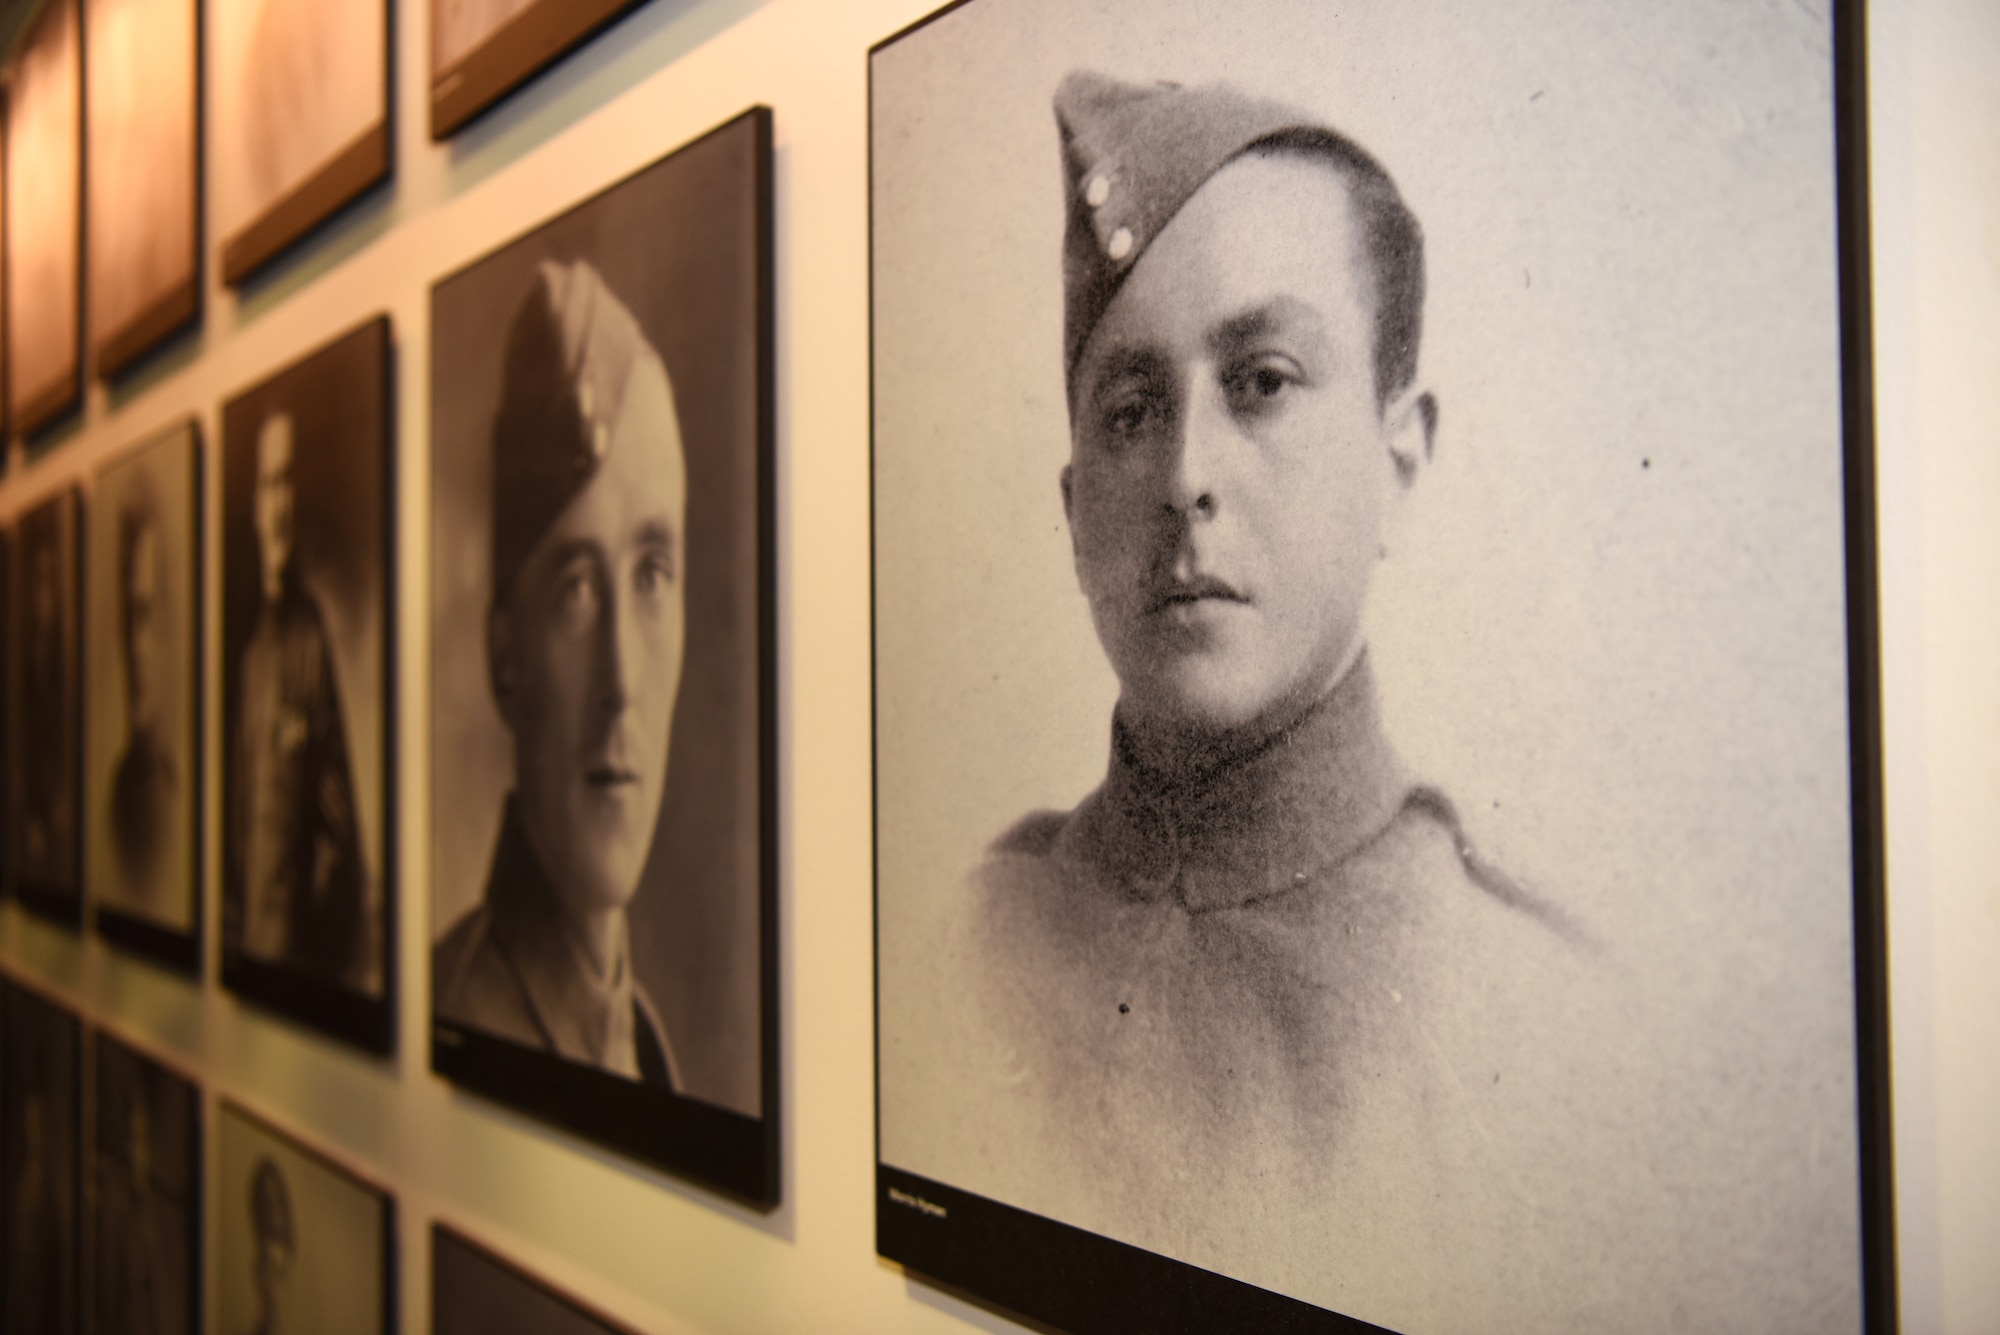 Photos of Royal Flying Corps Airmen who perished during World War I are displayed in Hangar II at the RAF Museum, London, England, Nov. 30, 2018. The RFC supported the British Army by employing artillery co-operation, photographic reconnaissance and eventually aerial battles with German pilots. (U.S. Air Force photo by Airman 1st Class Brandon Esau)